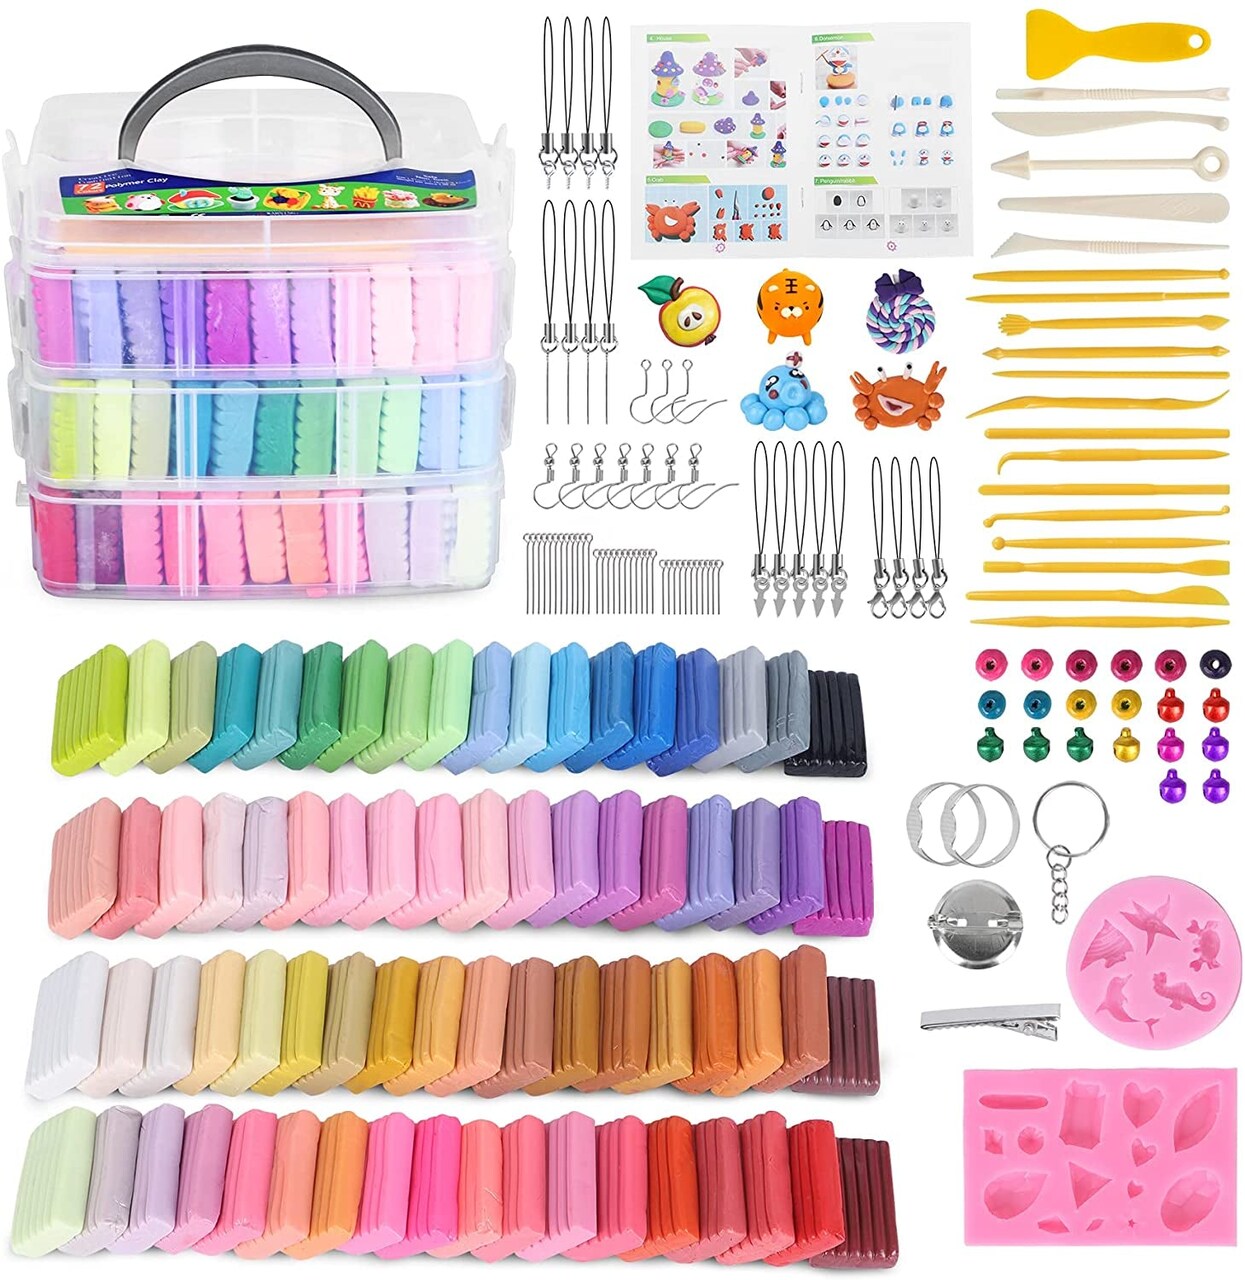 Polymer Clay 50 Colors, Modeling Clay for Kids DIY Starter Kits, Oven Baked  Model Clay, Non-Toxic, Non-Sticky,With Sculpting Tools, Gift for Children